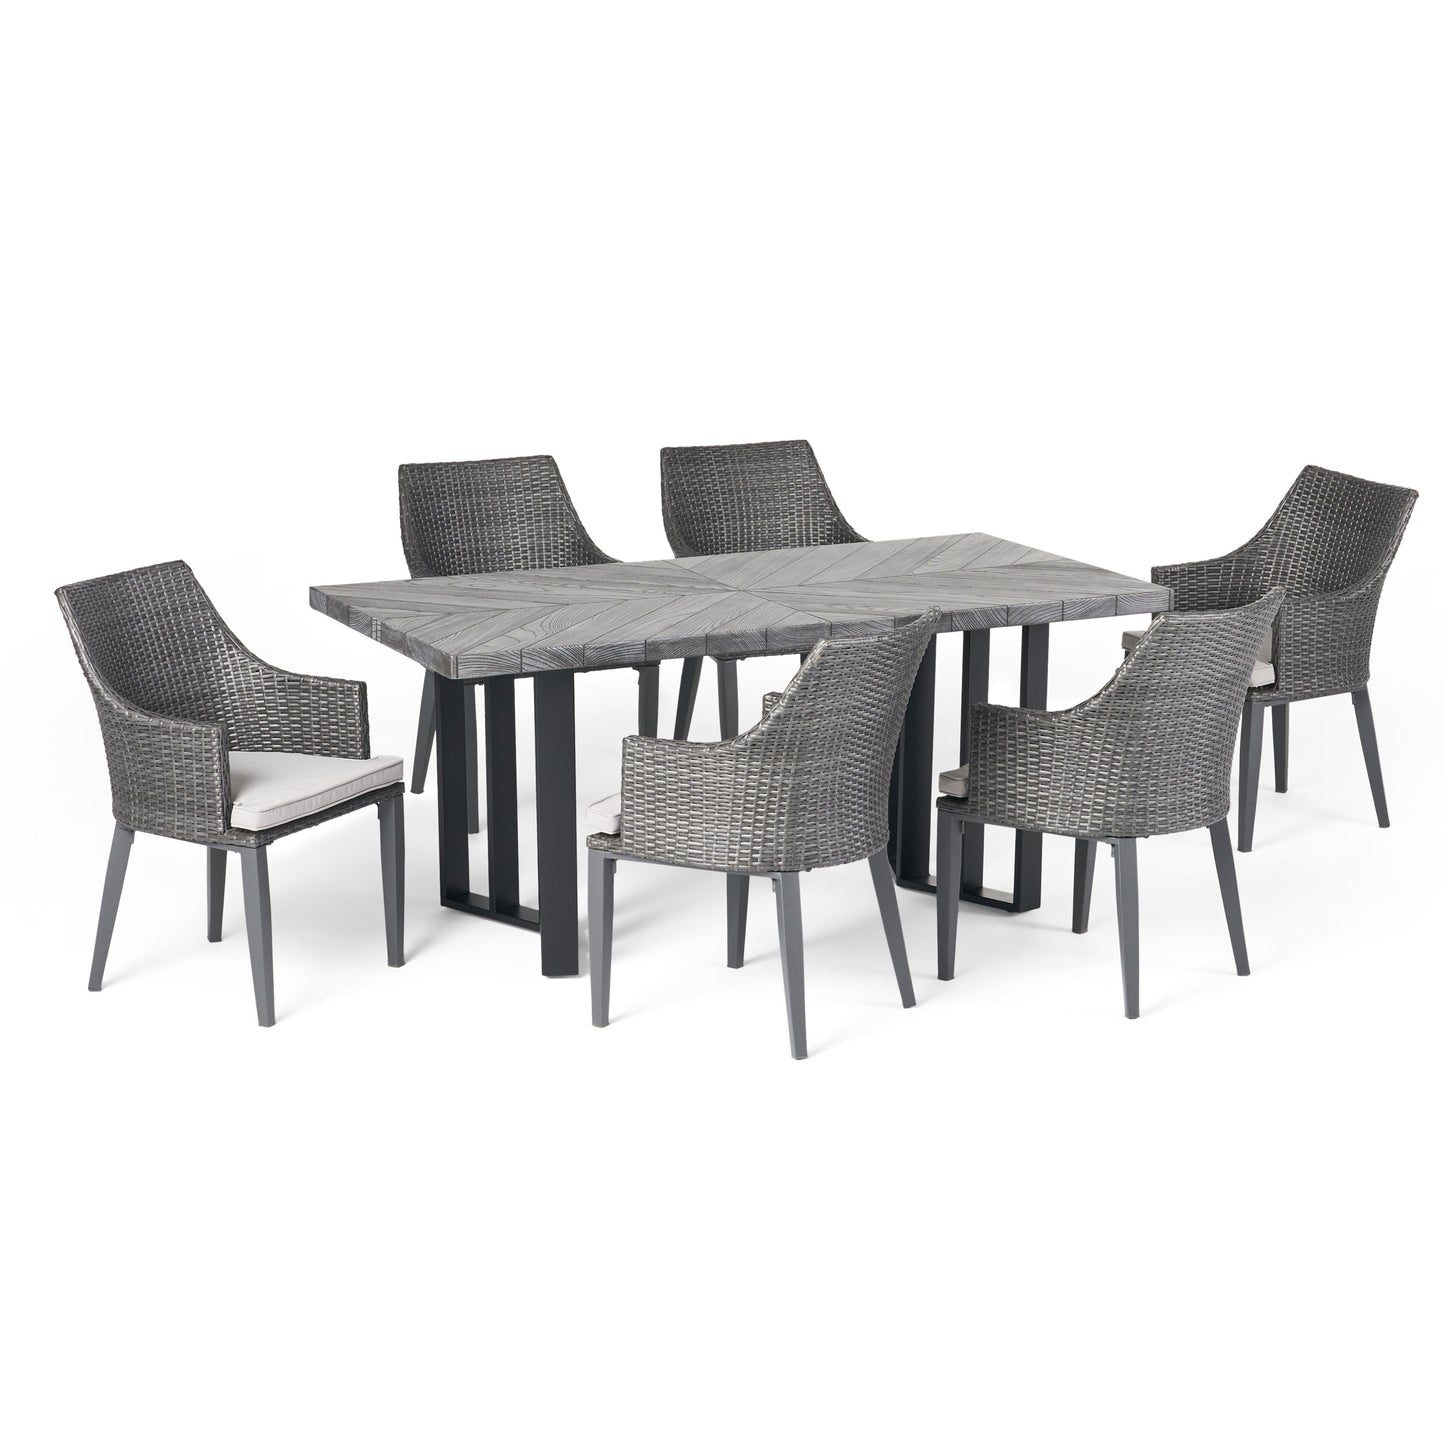 Valby Outdoor 7 Piece Wicker Dining Set with Concrete Dining Table